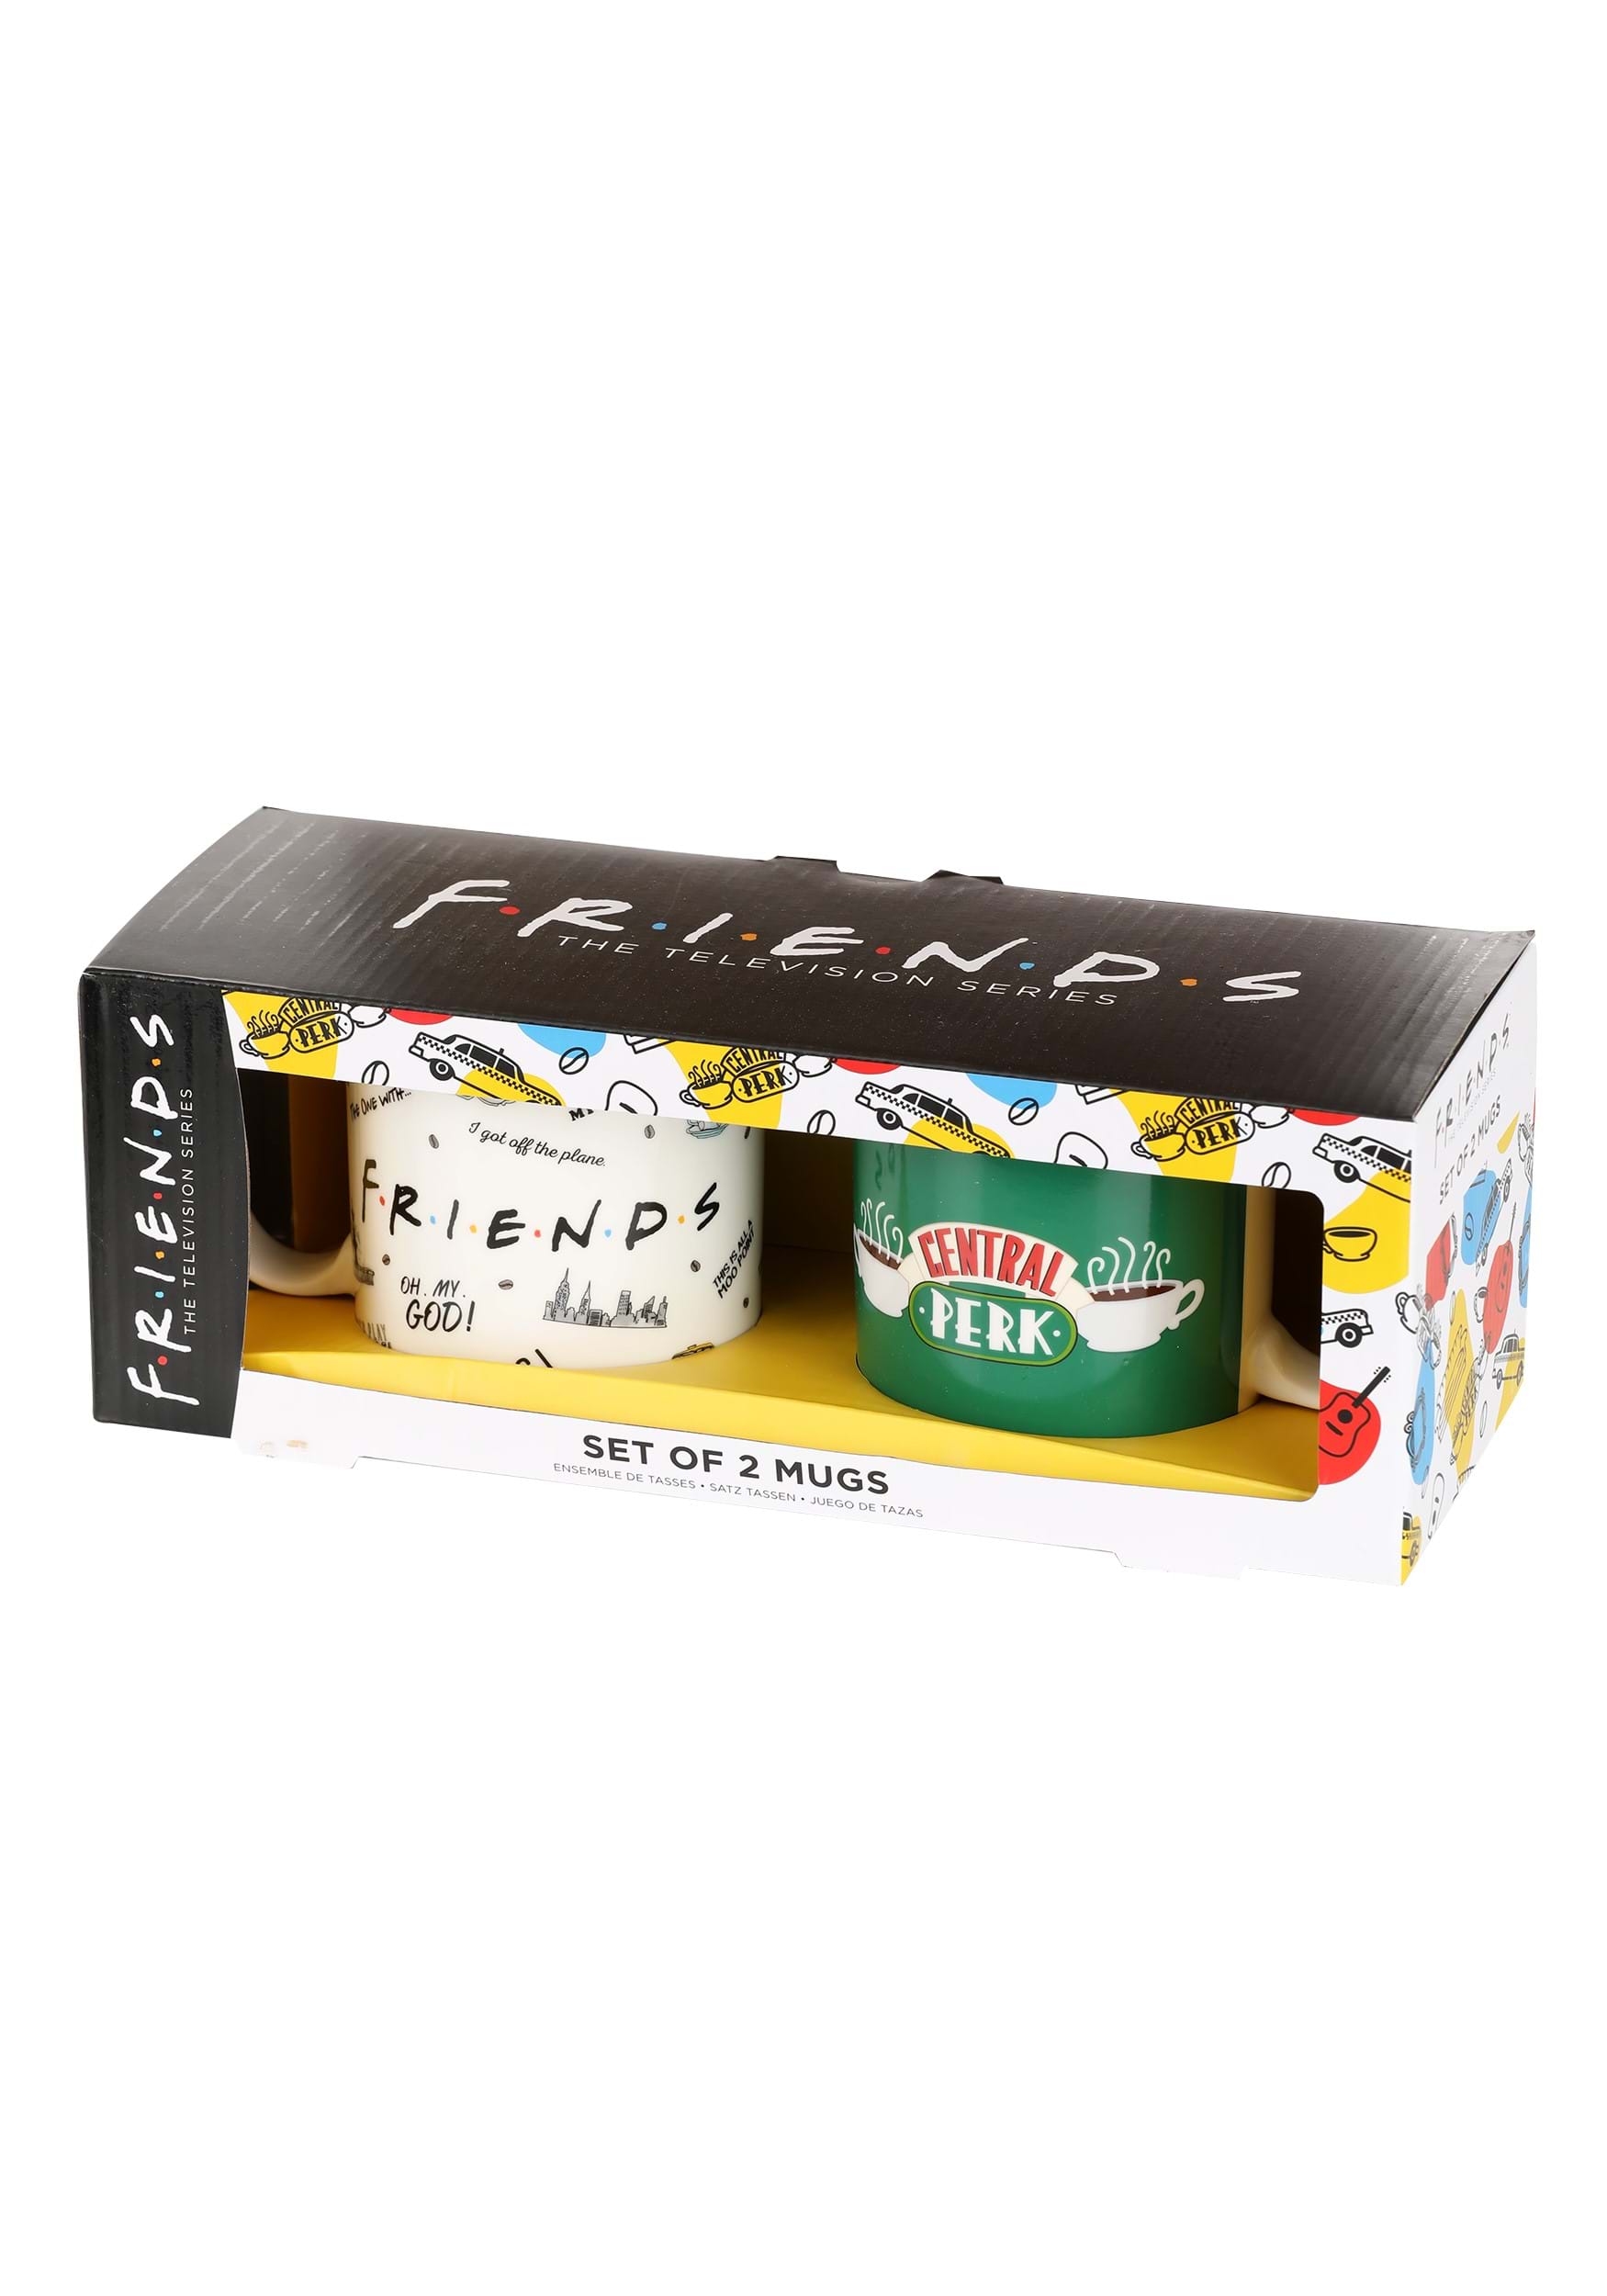 https://images.fun.com/products/86763/1-1/friends-set-of-2-oversized-mugs.jpg